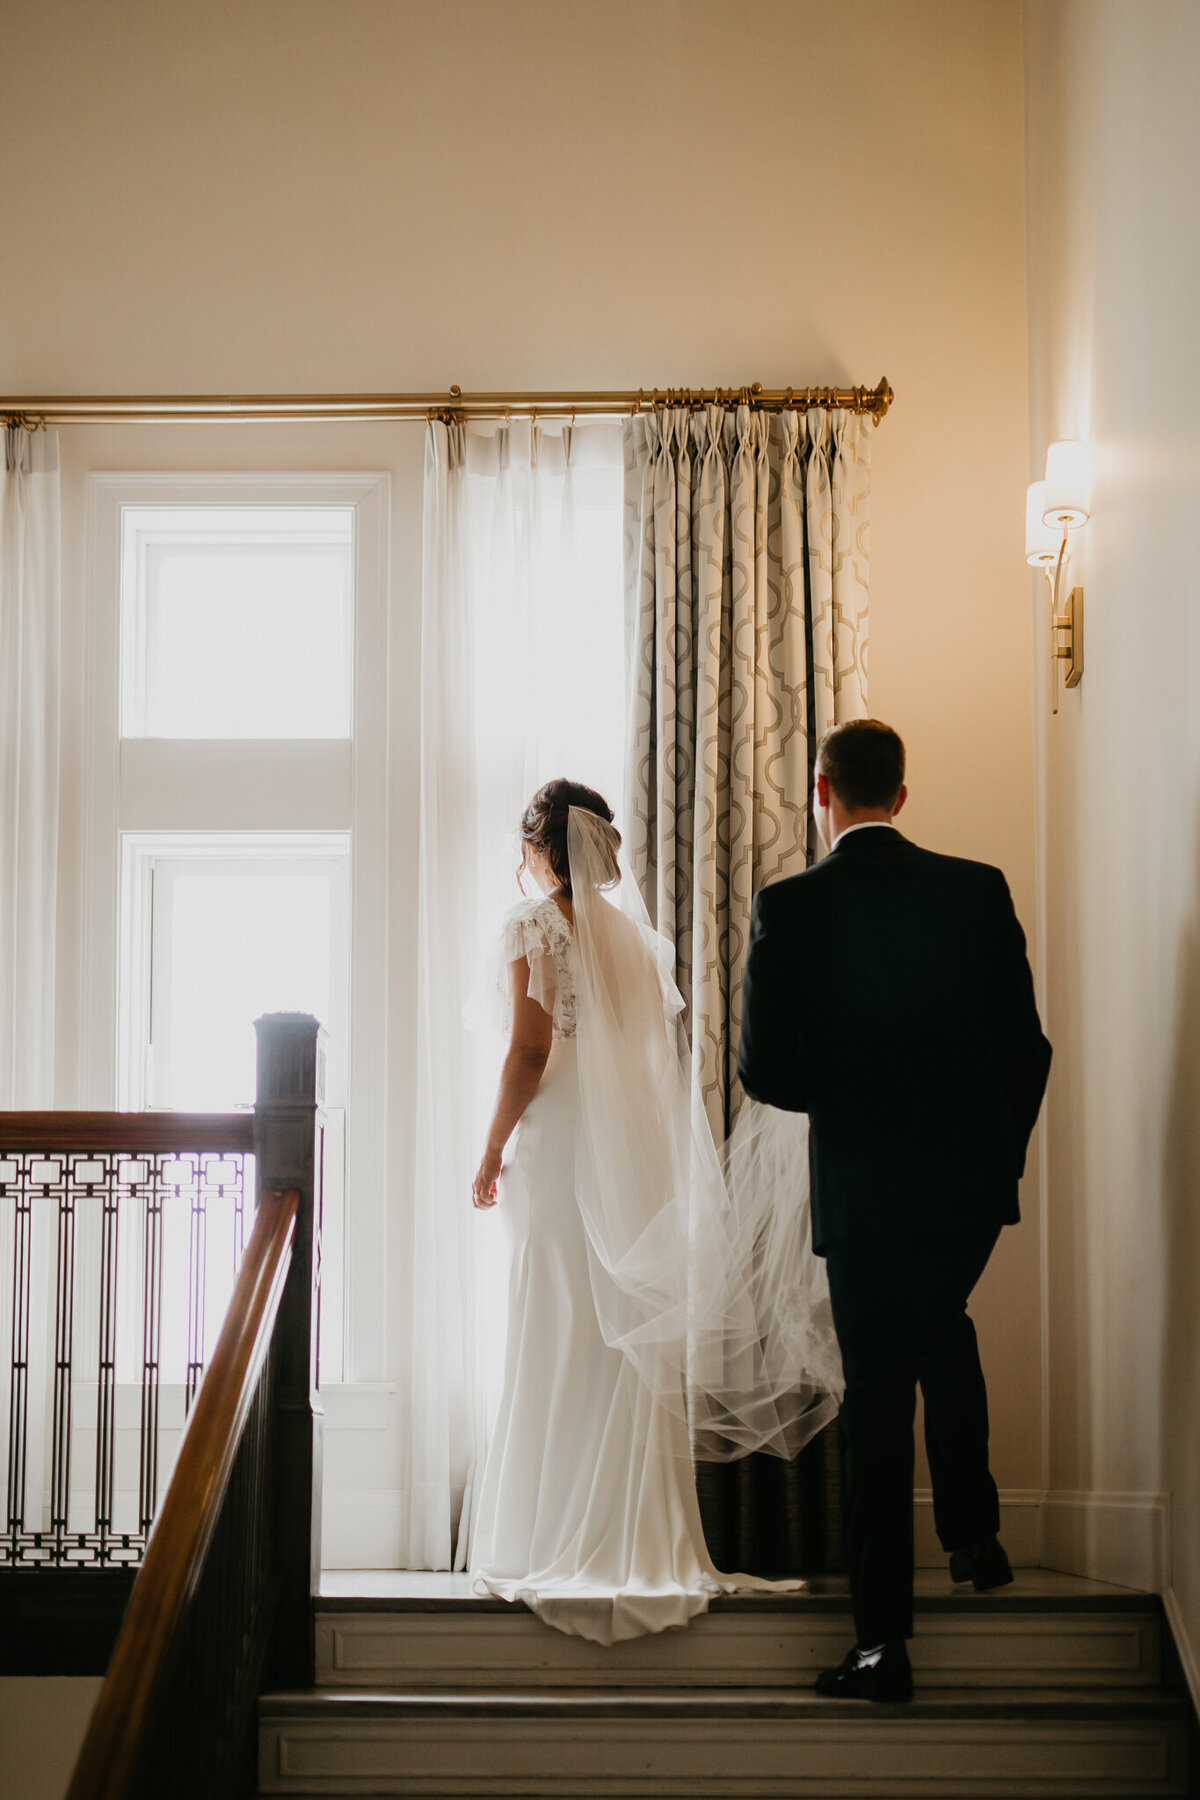 Bride and groom walking up an romantic staircase captured by Nikki Collette Photography, adventurous and romantic wedding photographer in Red Deer, Alberta. Featured on the Bronte Bride Vendor Guide.